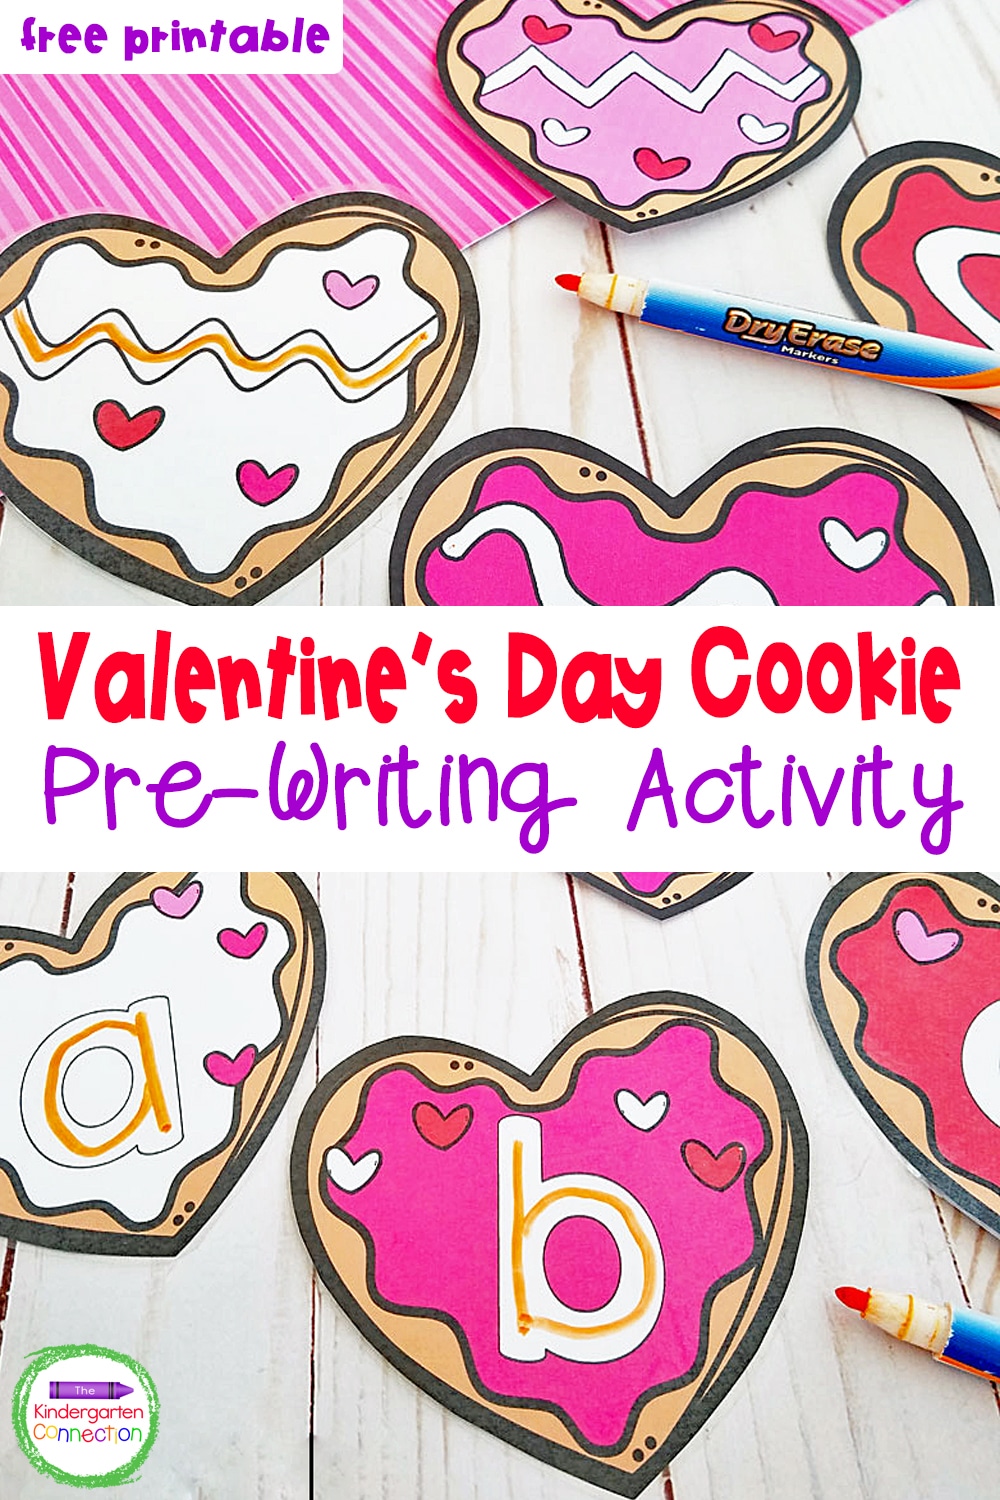 Valentine’s Day Cookie Pre-Writing Activity